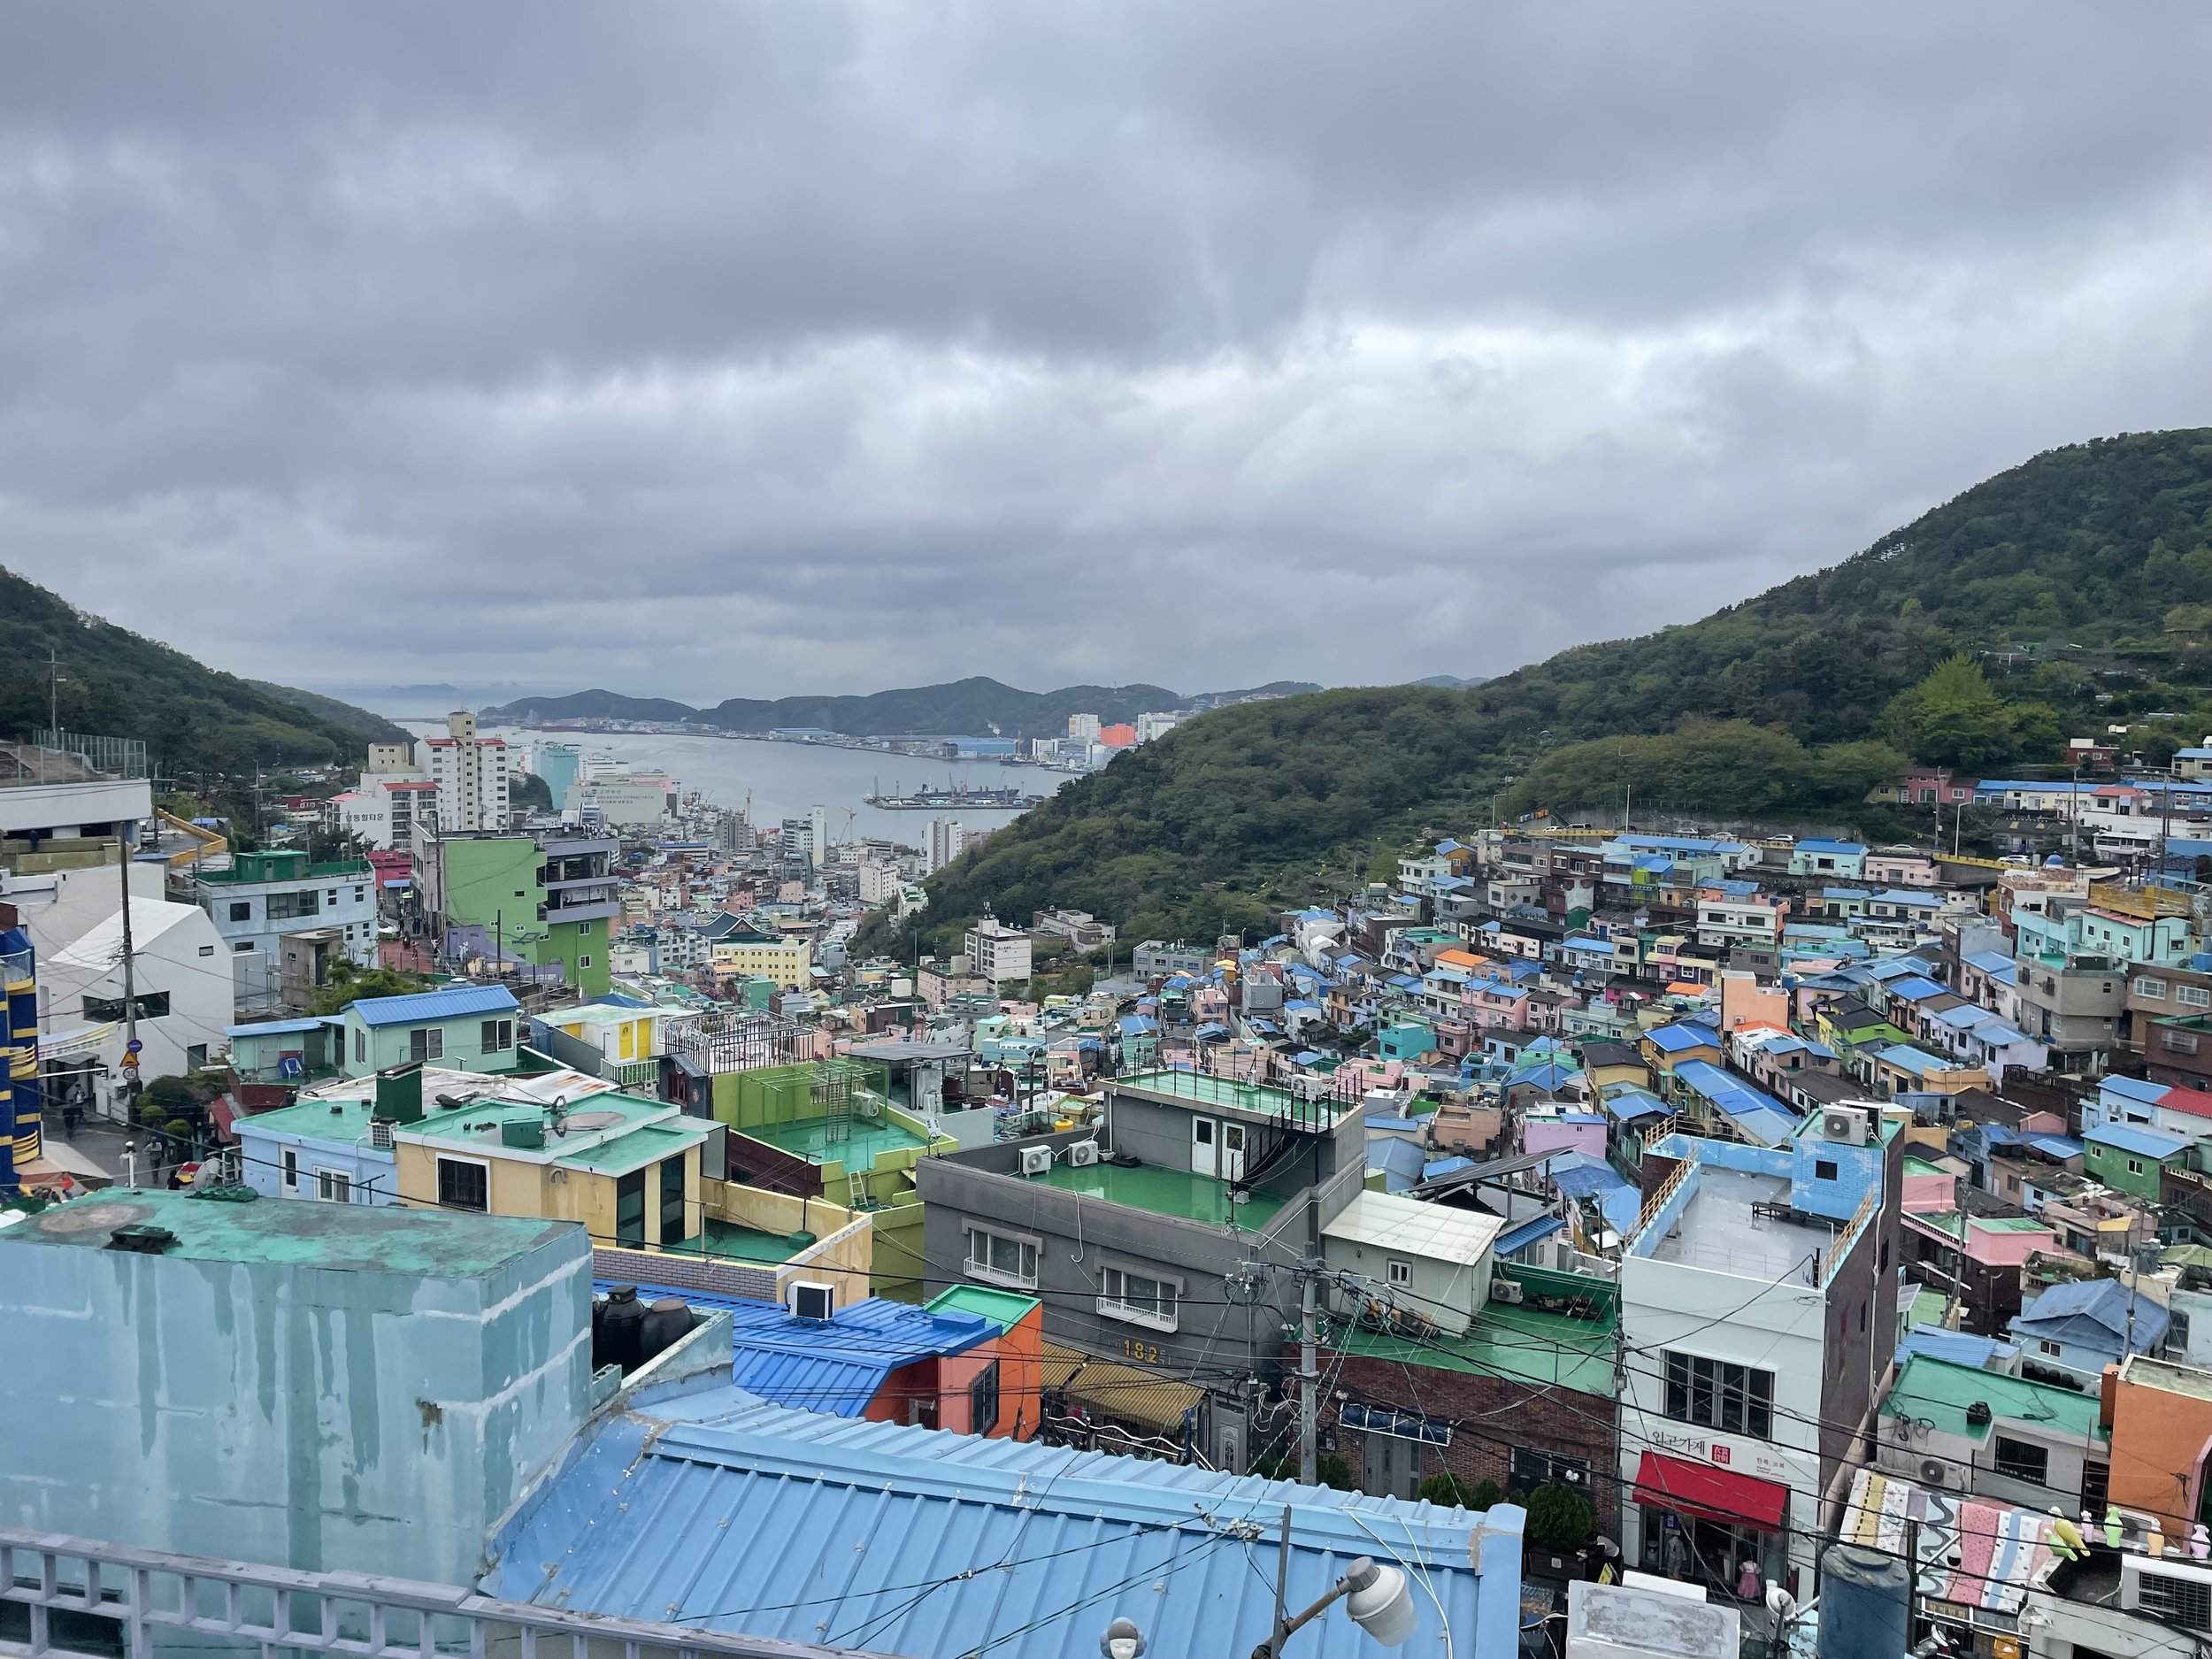 Gamcheon Culture Village looking to one of the Ports of Busan